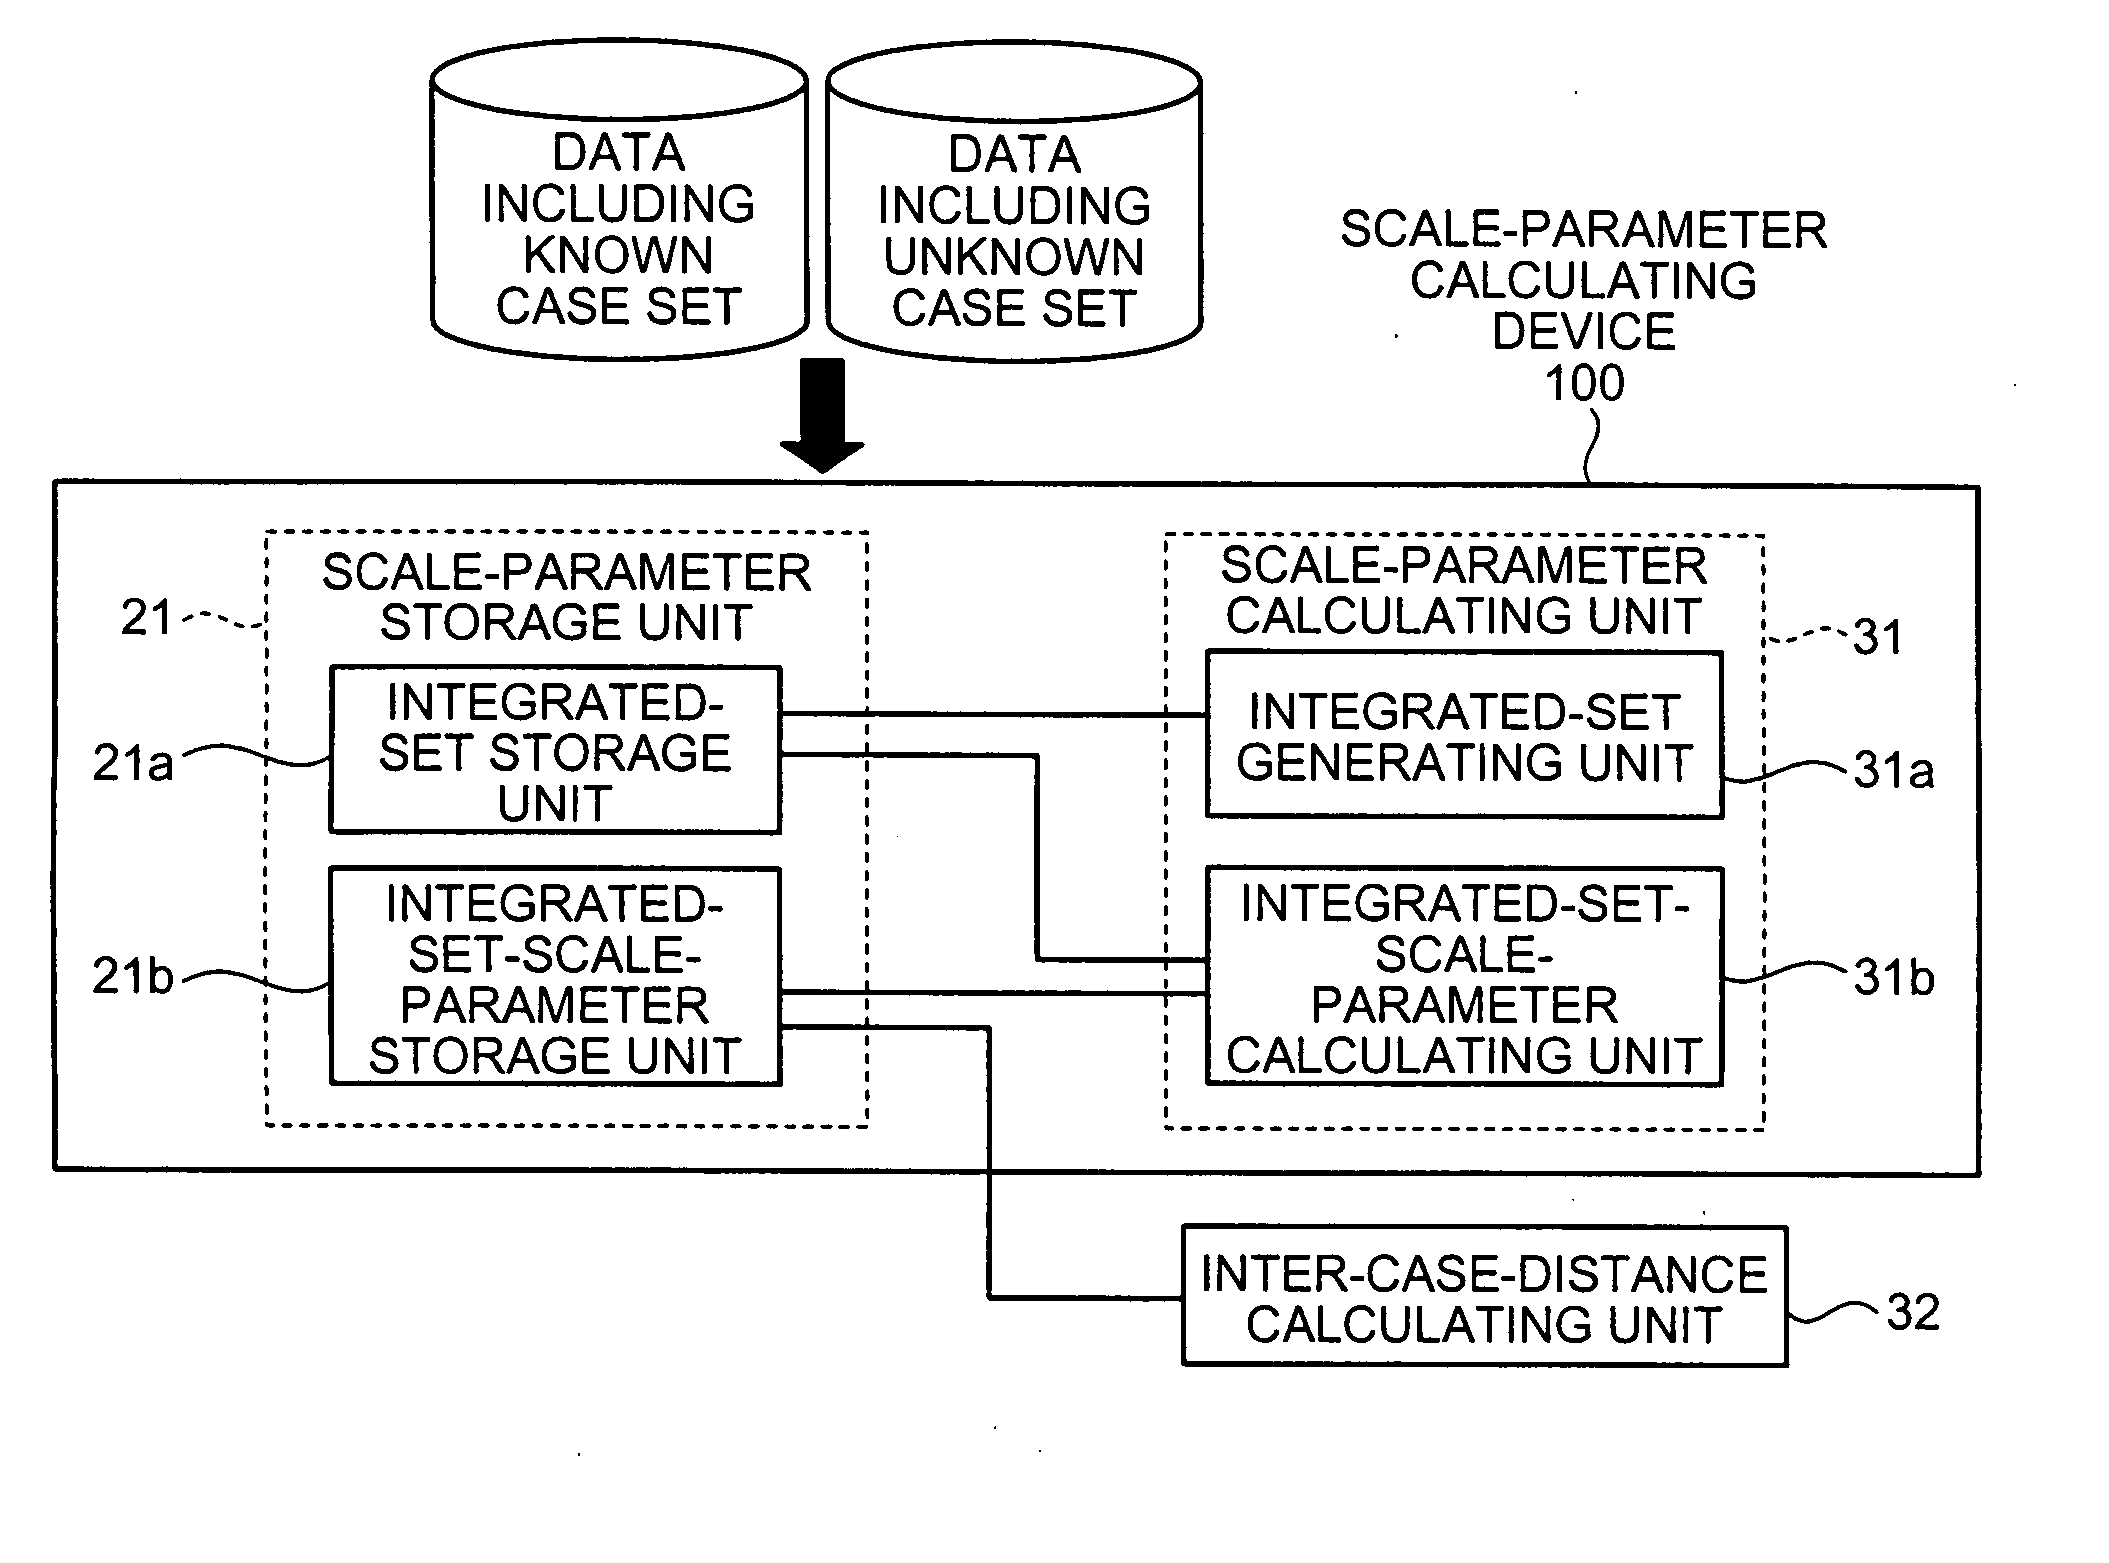 Computer-readable recording medium, apparatus and method for calculating scale-parameter